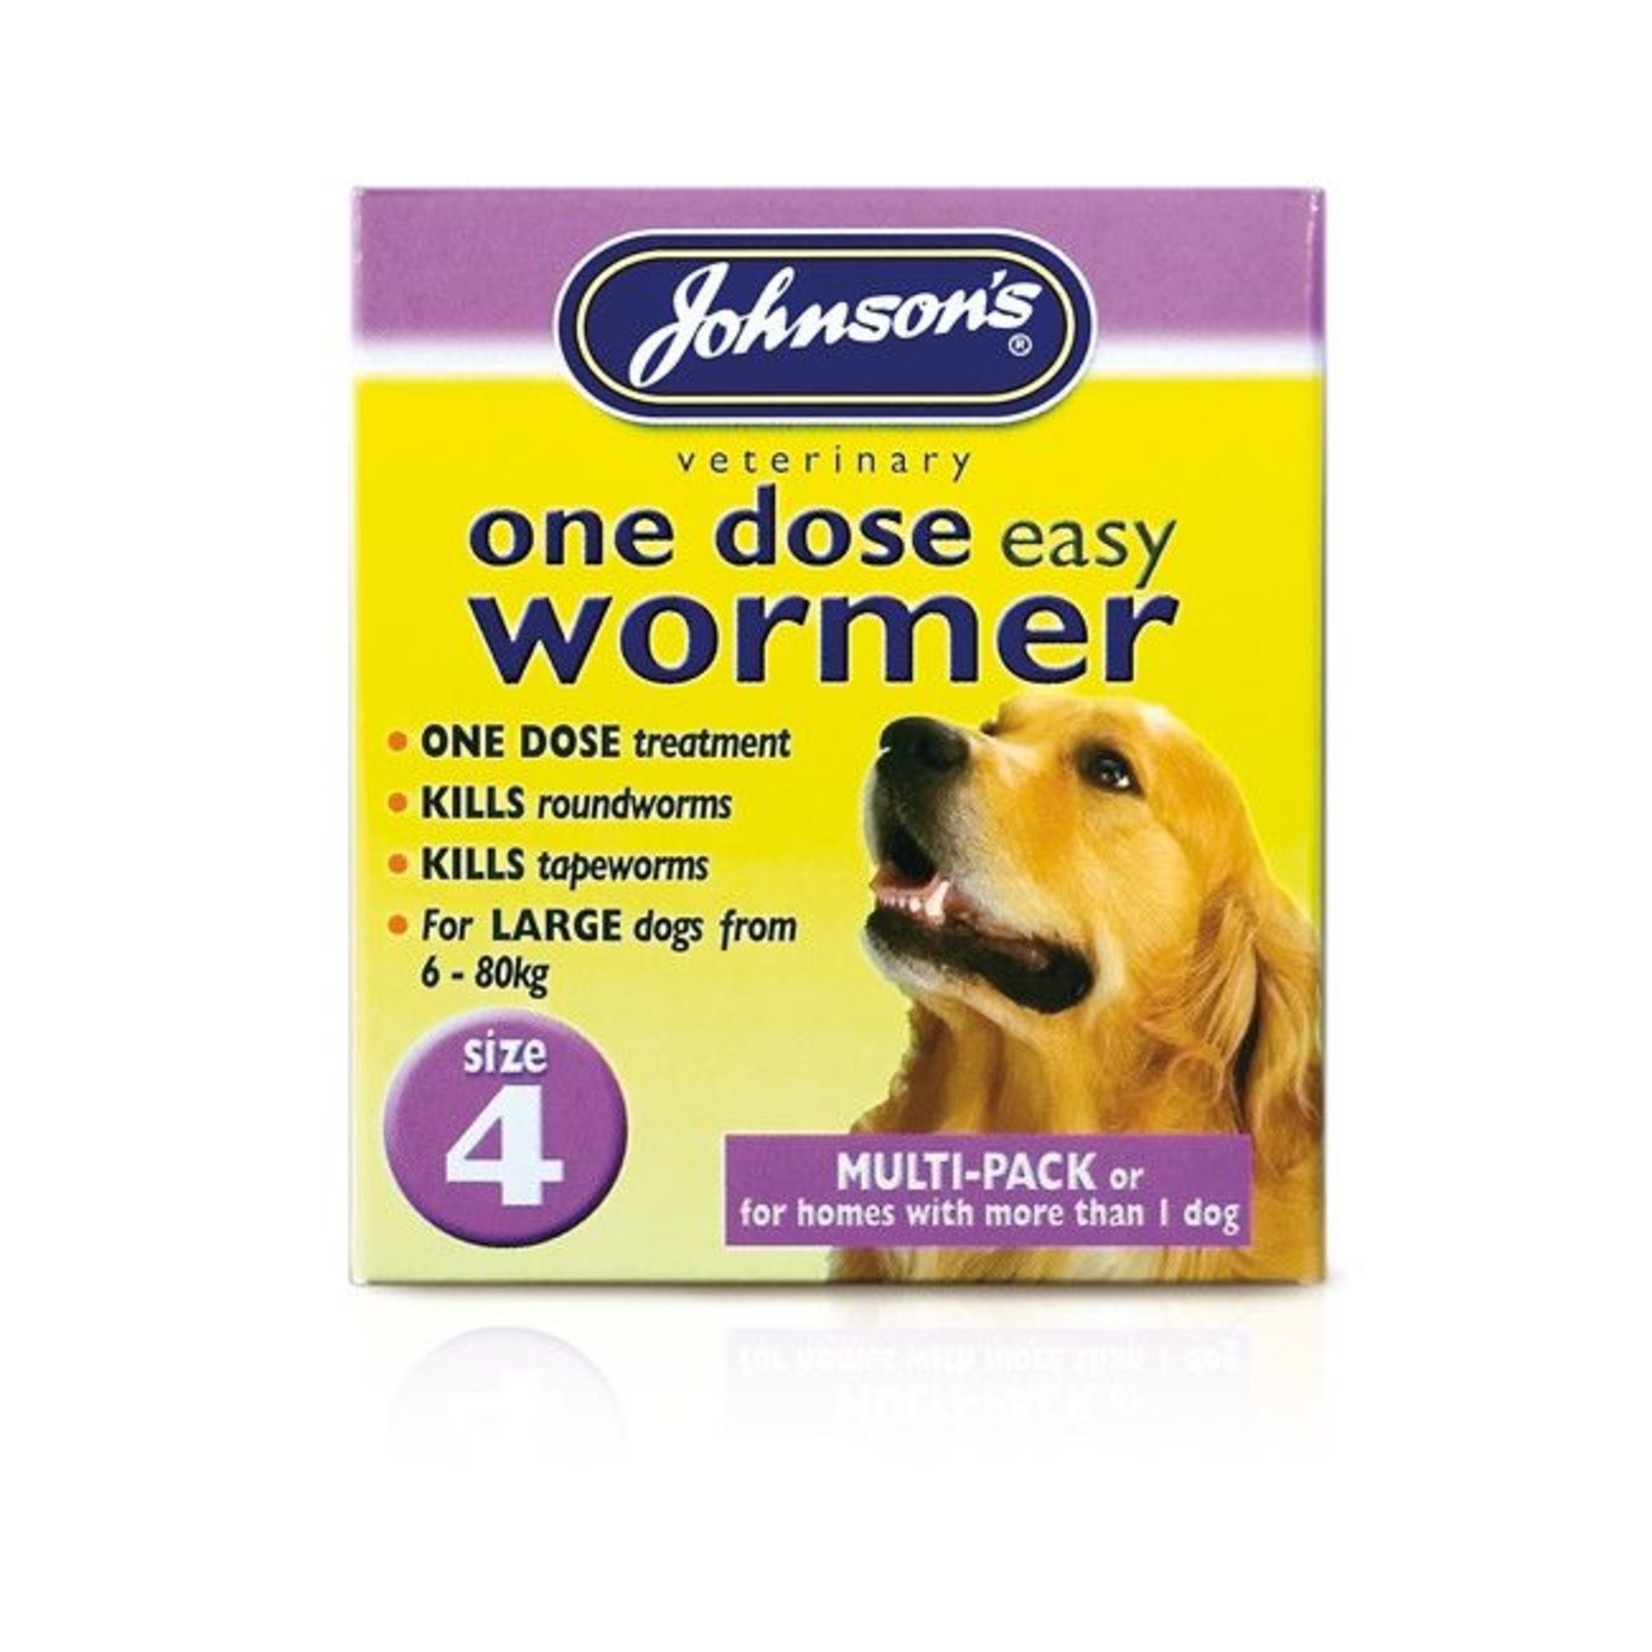 Johnson's Veterinary One Dose Easy Wormer for Dogs